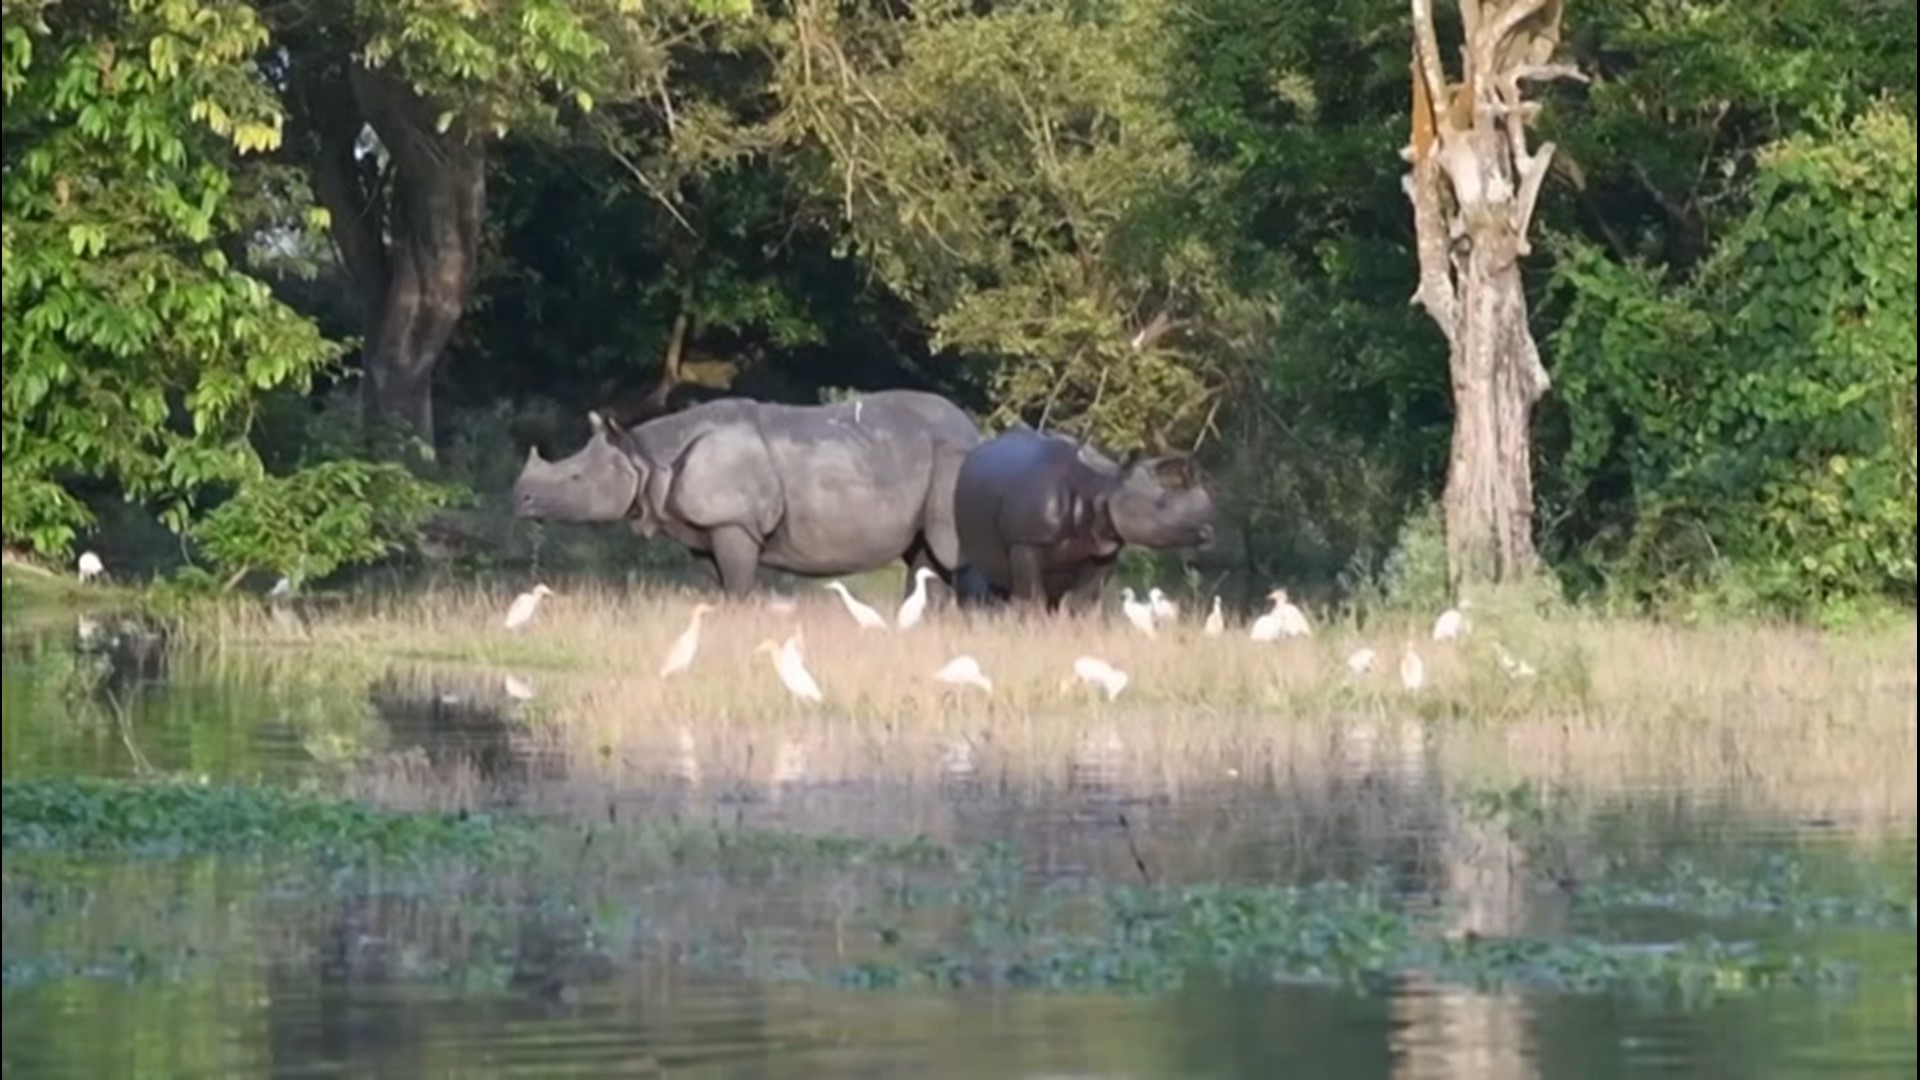 At least one rhino is dead after flash floods swept through the Pobitora Wildlife Sanctuary in Guwahati, India, on June 30.